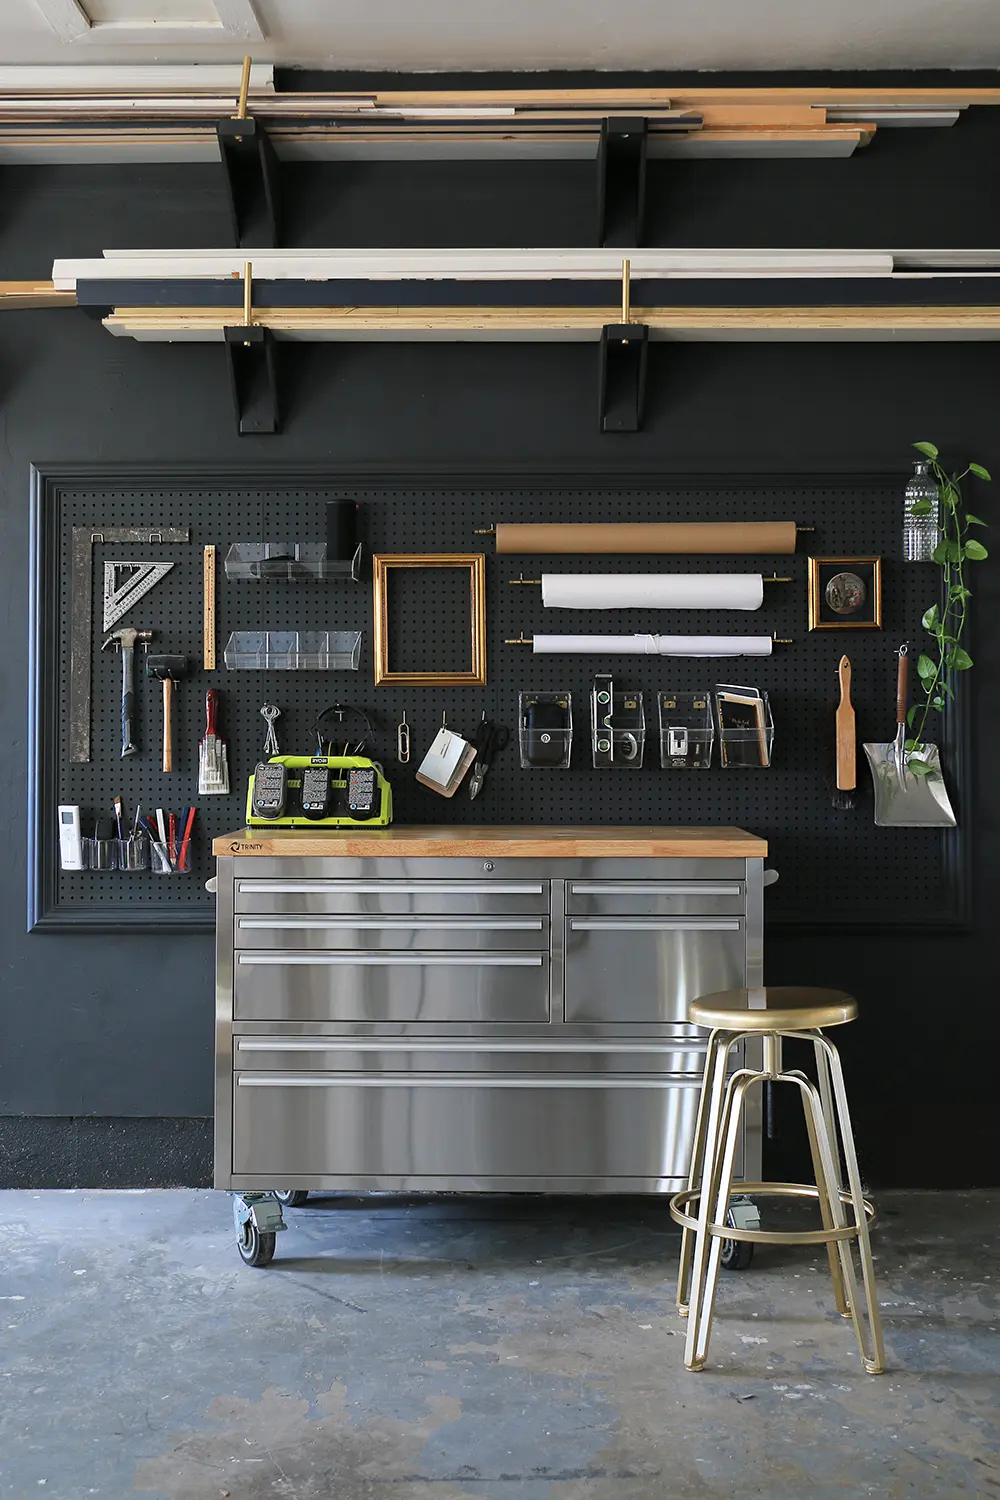 GARAGE STORAGE SOLUTIONS TO KEEP YOUR
GARAGE CLEAN AND ORGANISED